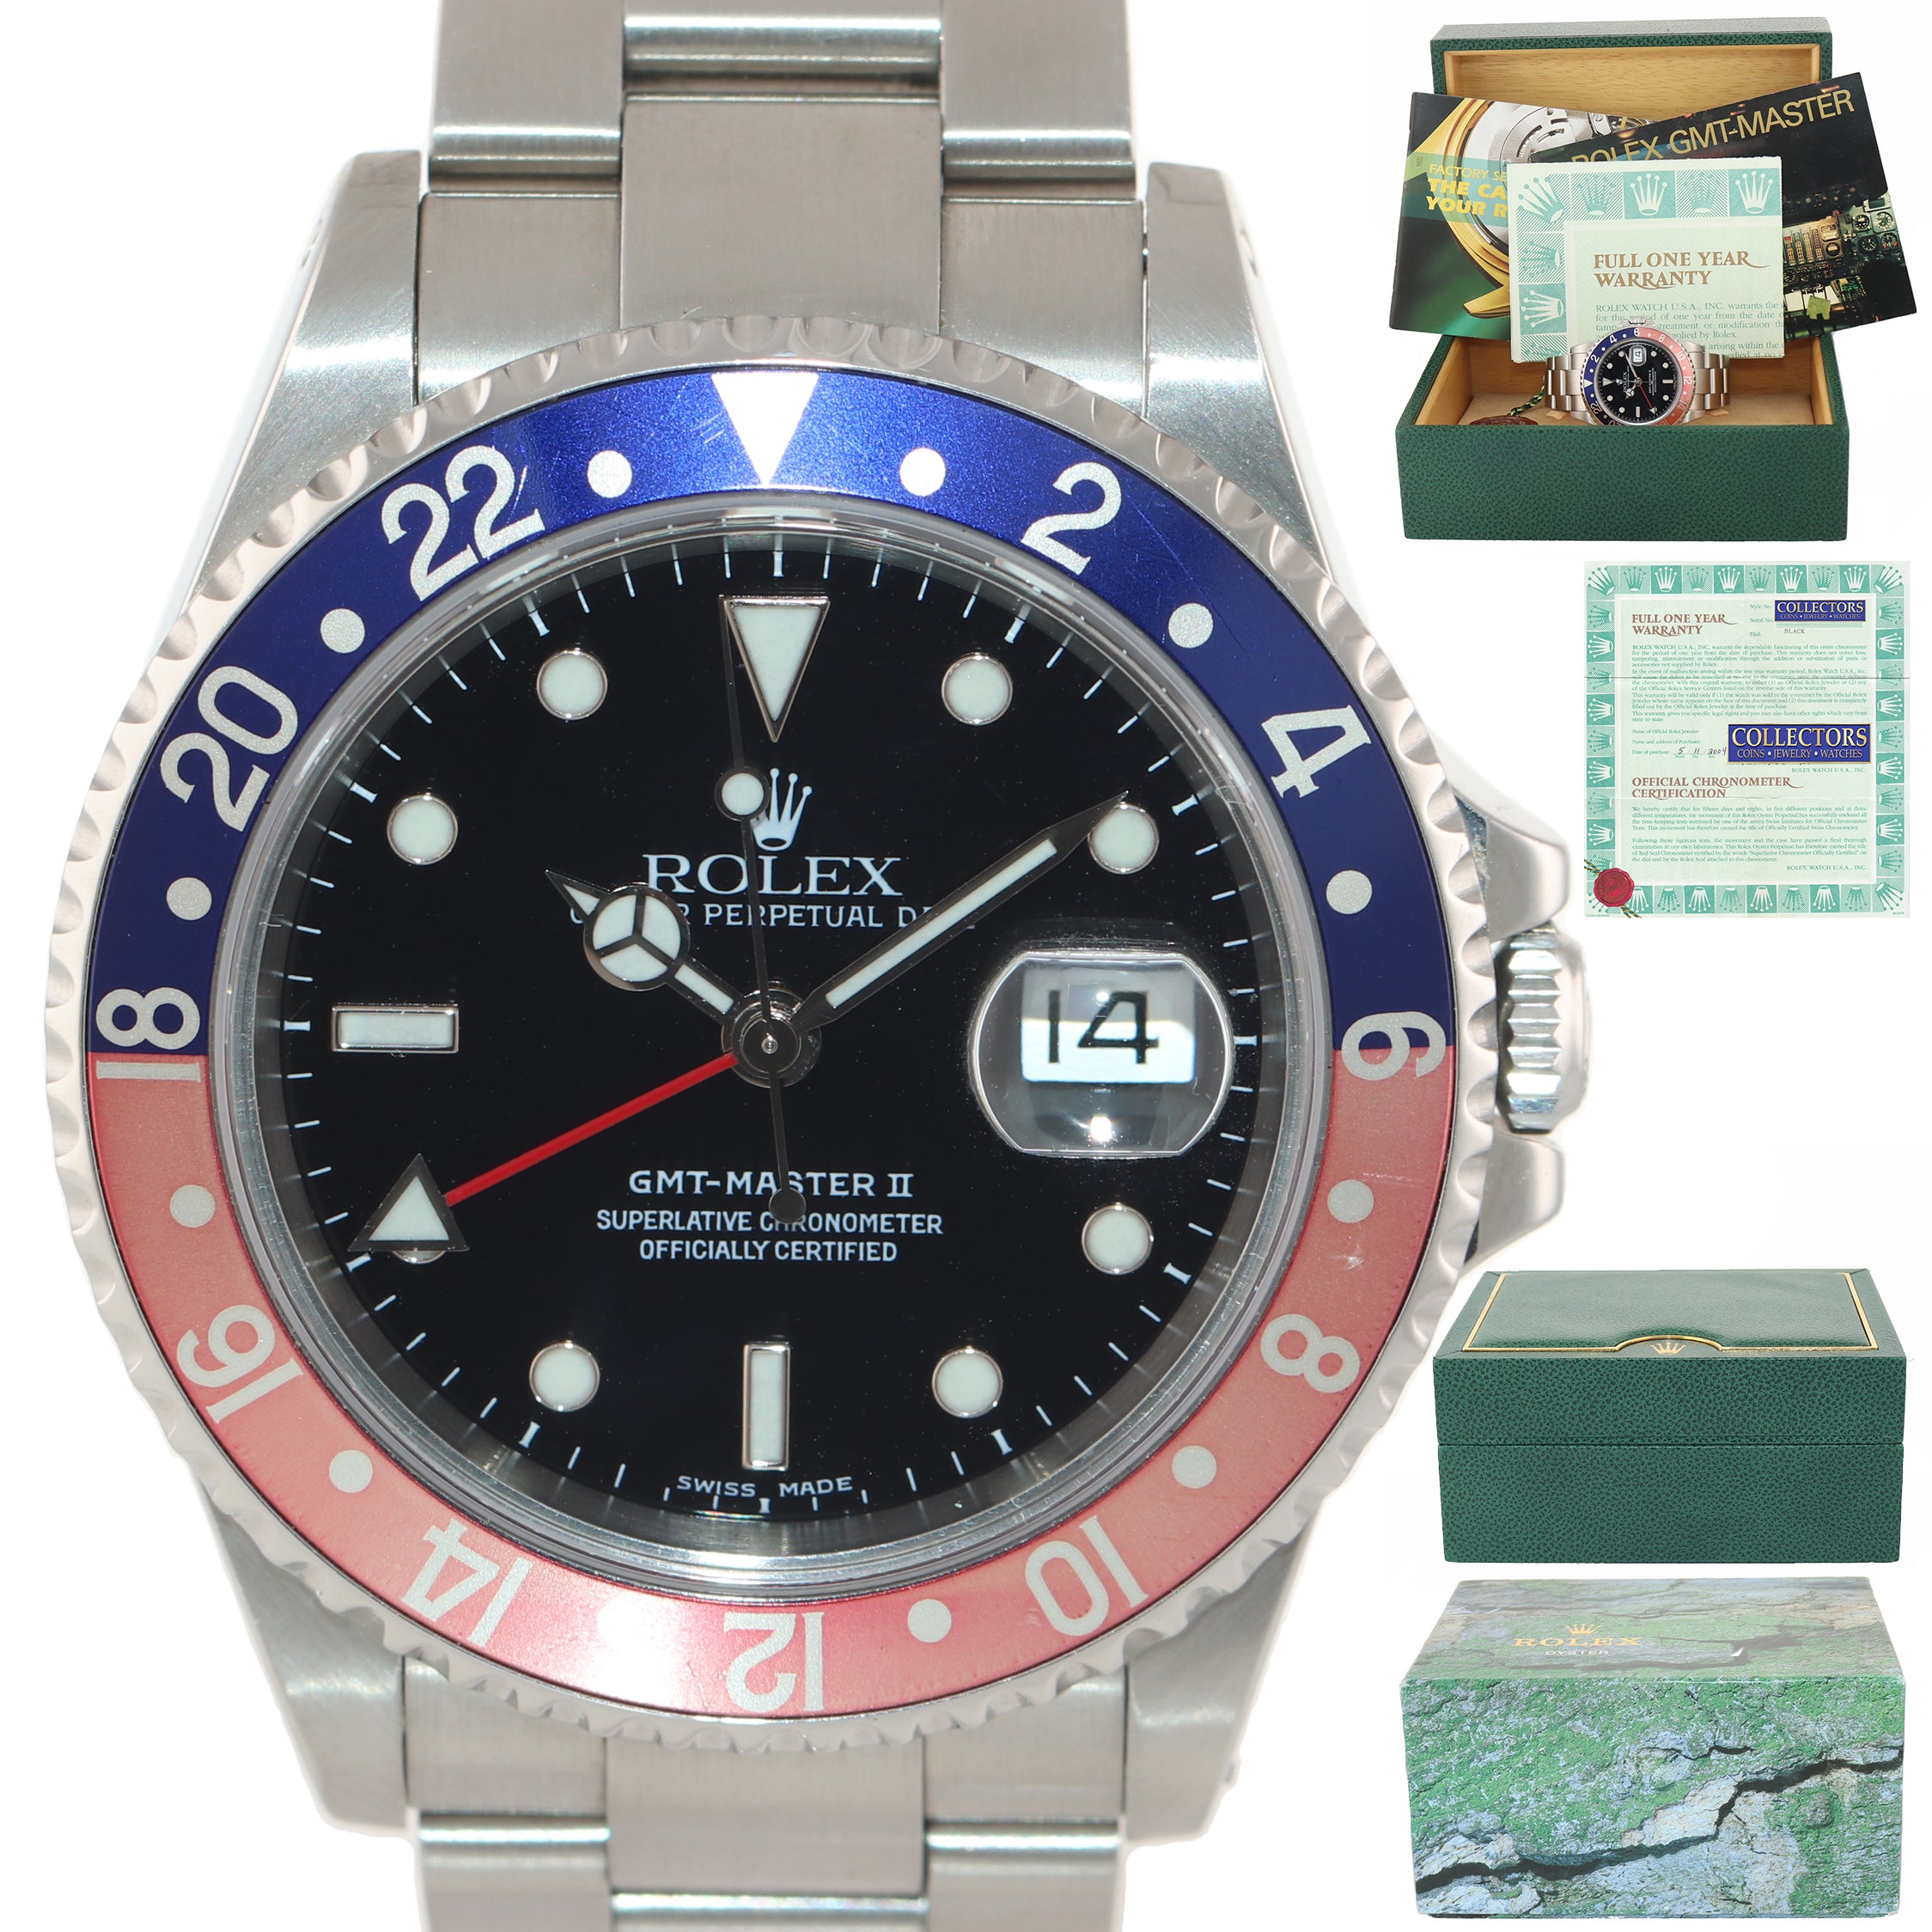 BLRO PAPERS Rolex GMT-Master 2 Pepsi Red Blue SEL Steel 16710 40mm Watch Box